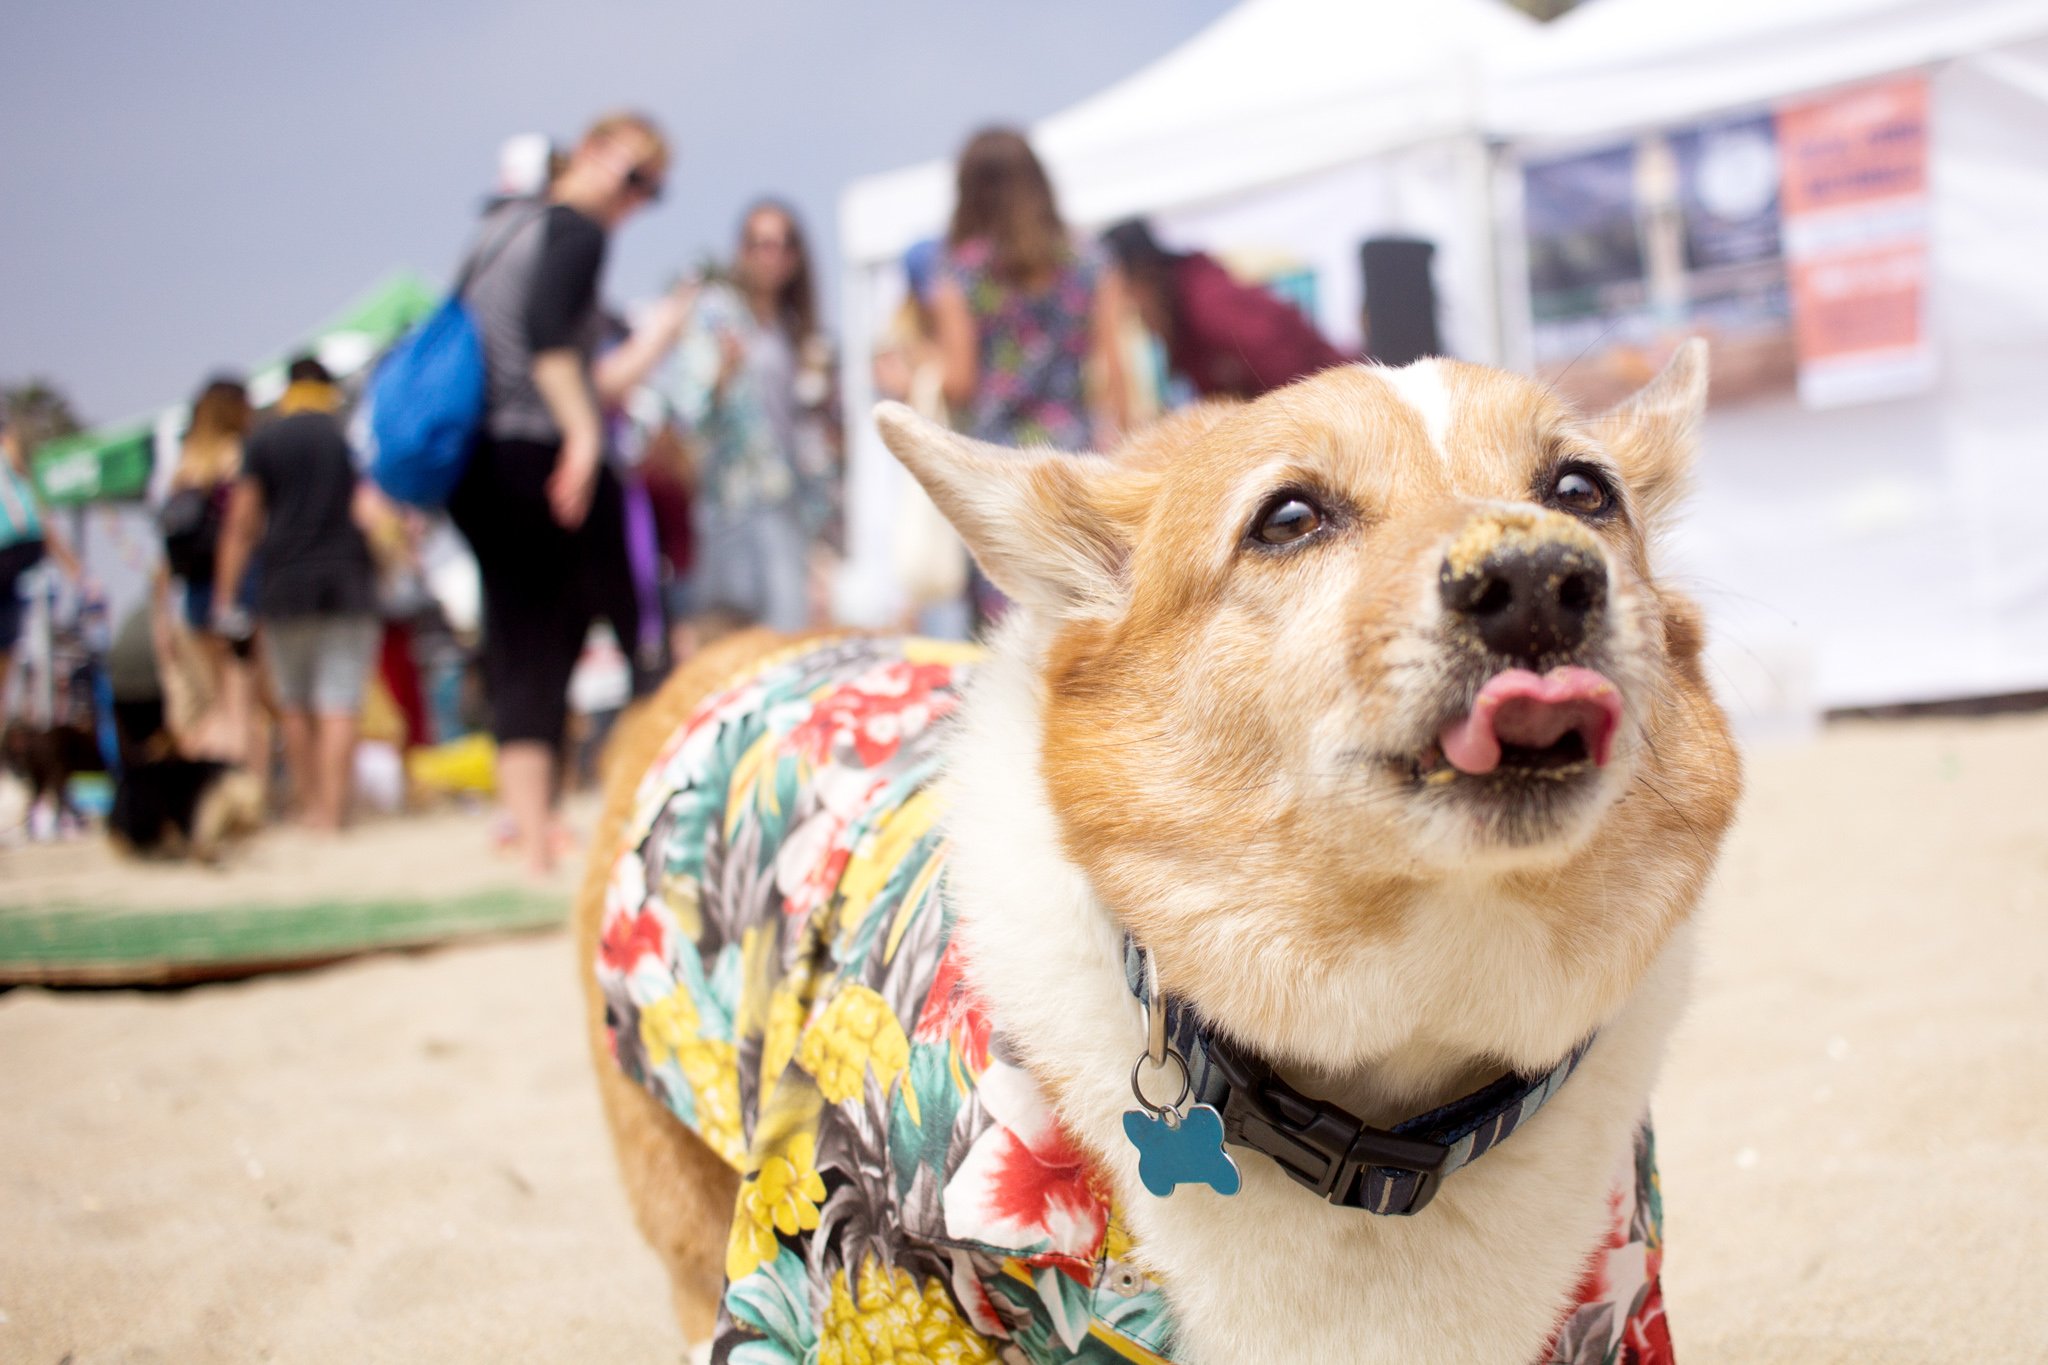 157-Orange County Pet and Dog Photography - by Steamer Lee - Corgi Beach Day - Southern Caliornia.JPG